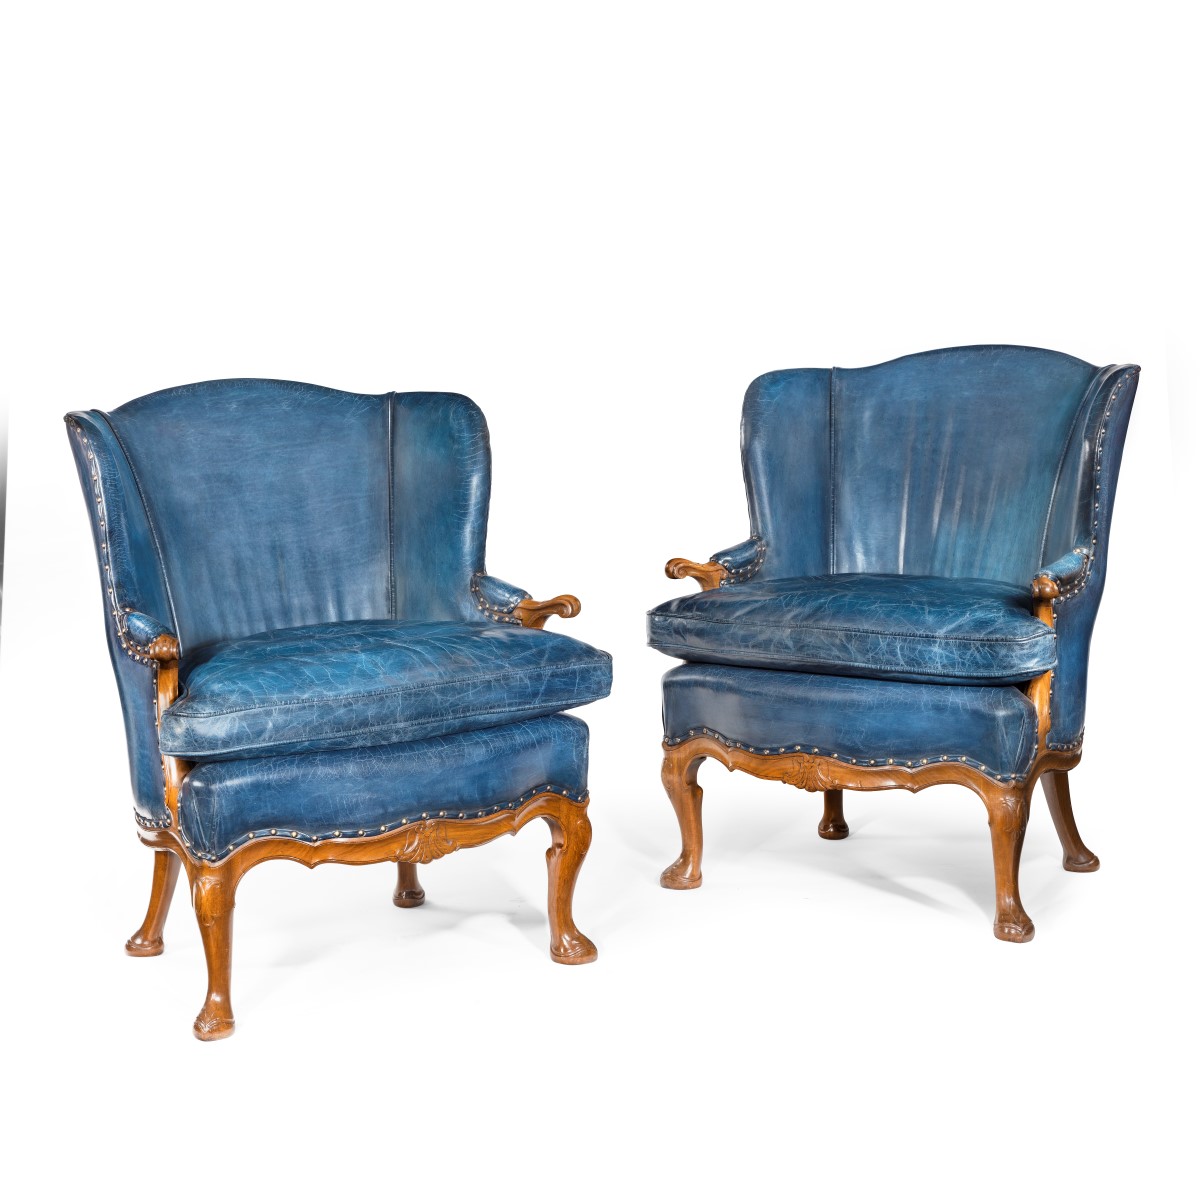 A pair of very generous mahogany wing armchairs attributed to Whytock and Reid, Edinburgh